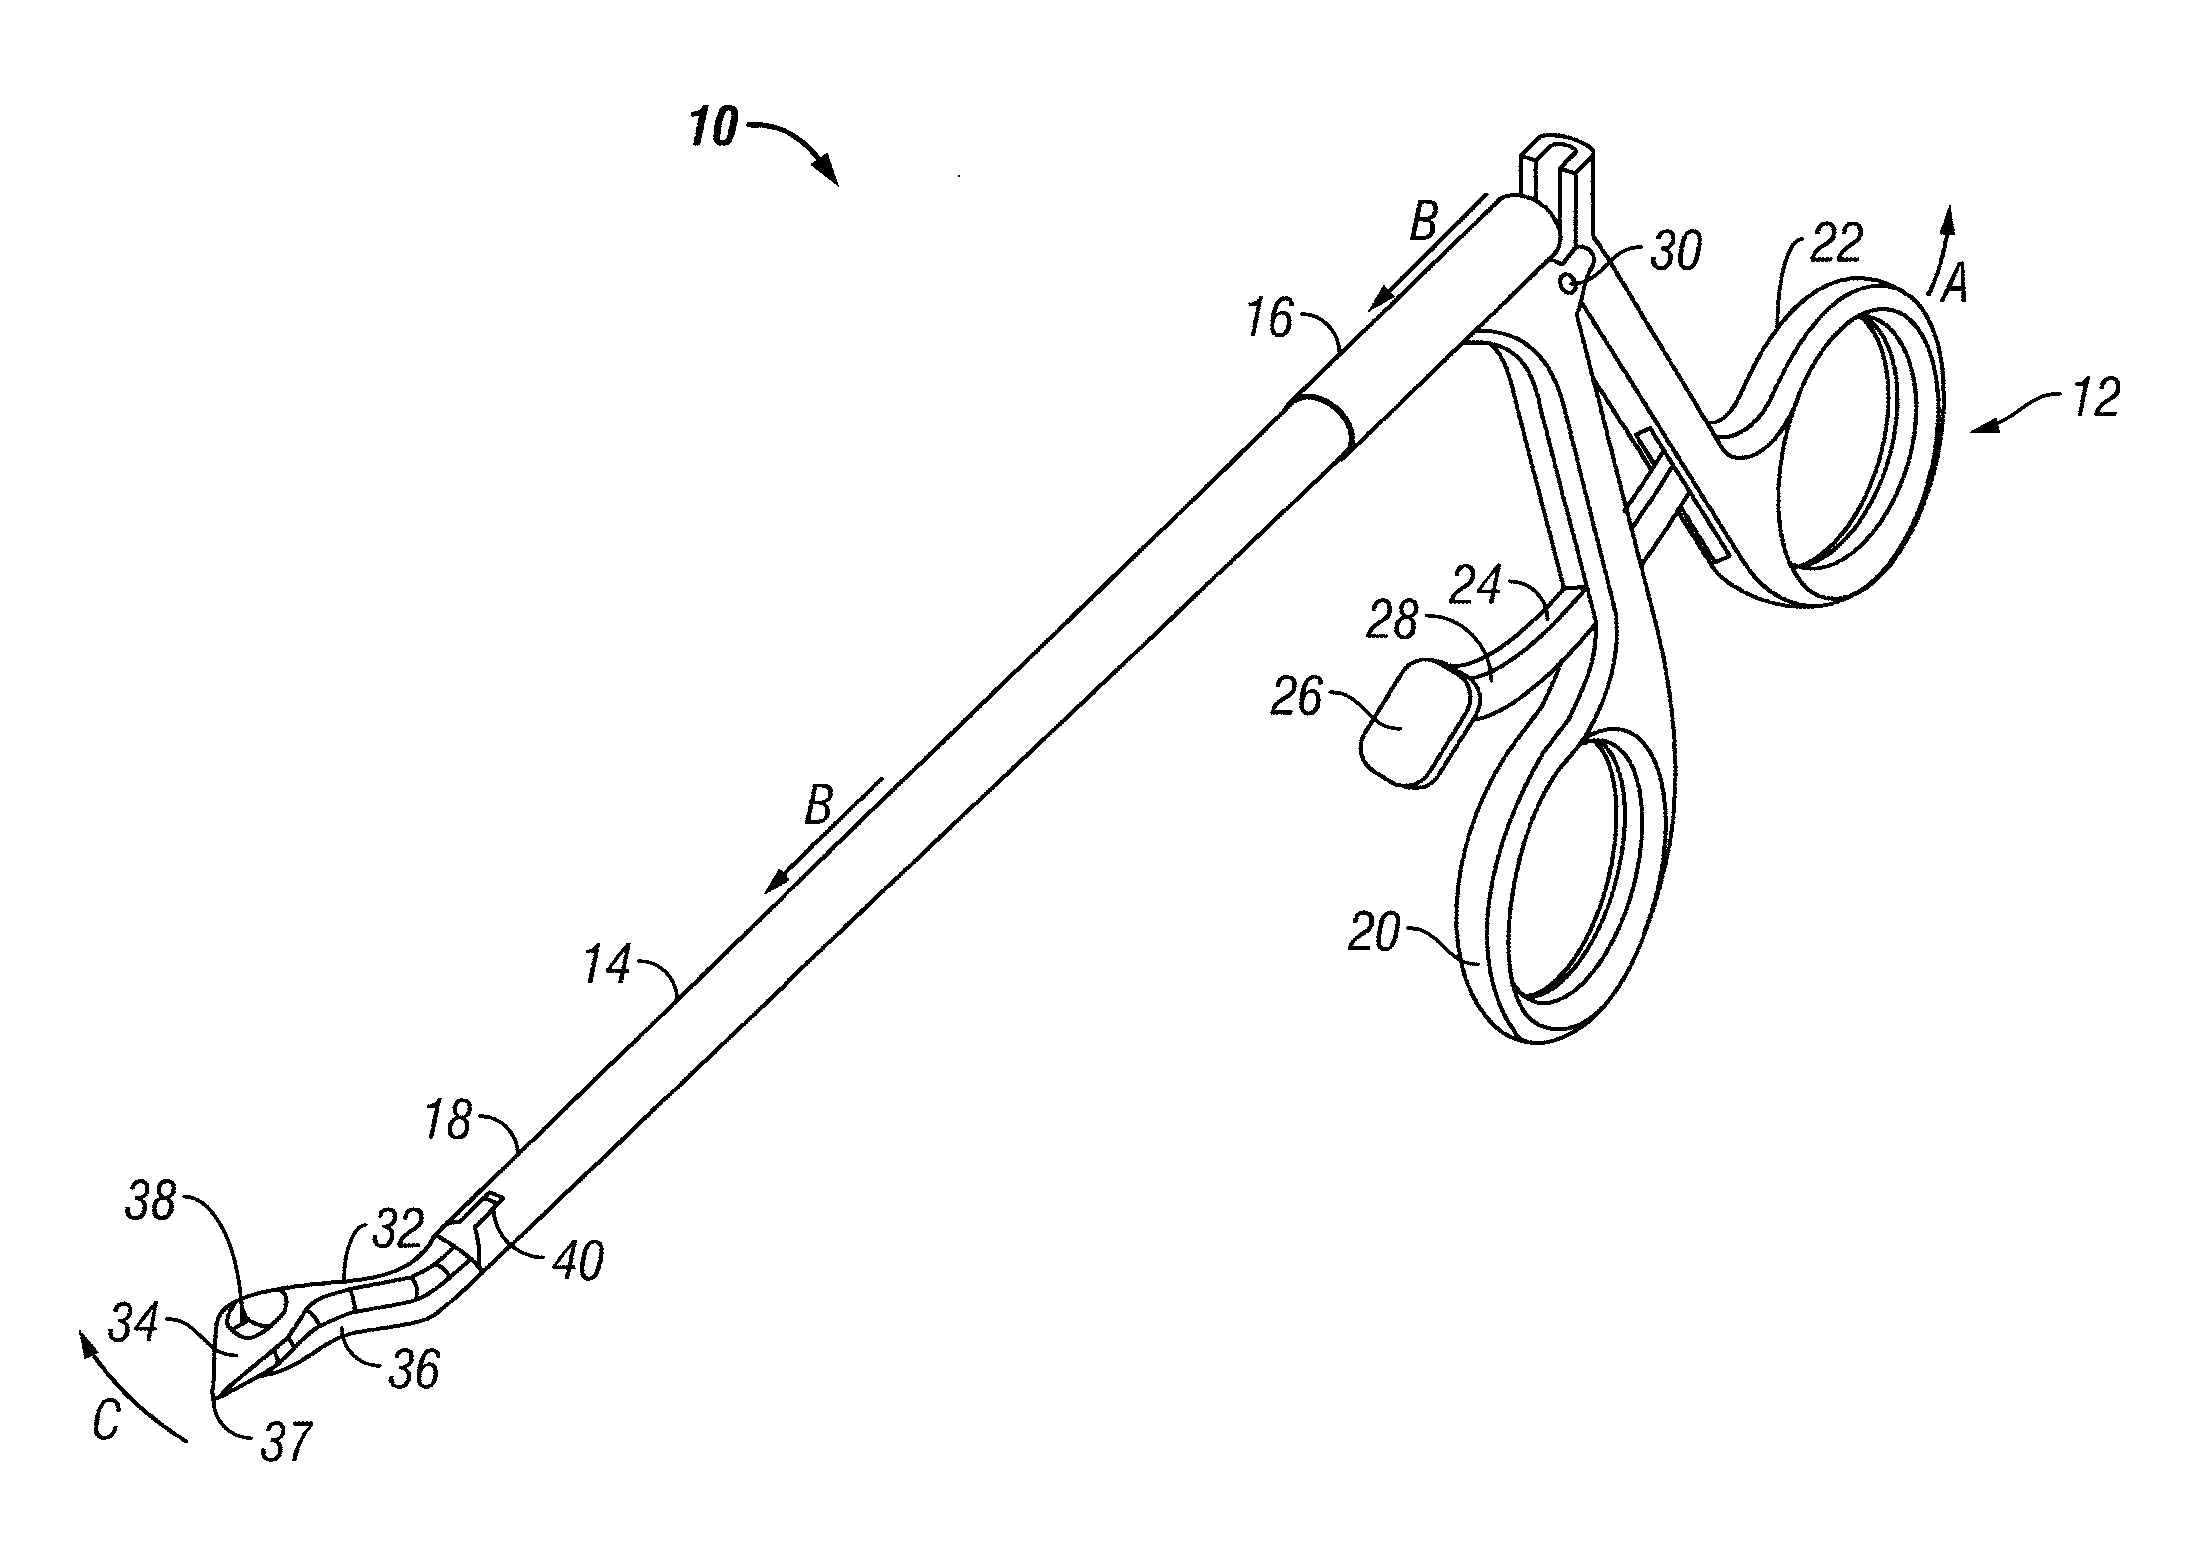 Surgical grasping device